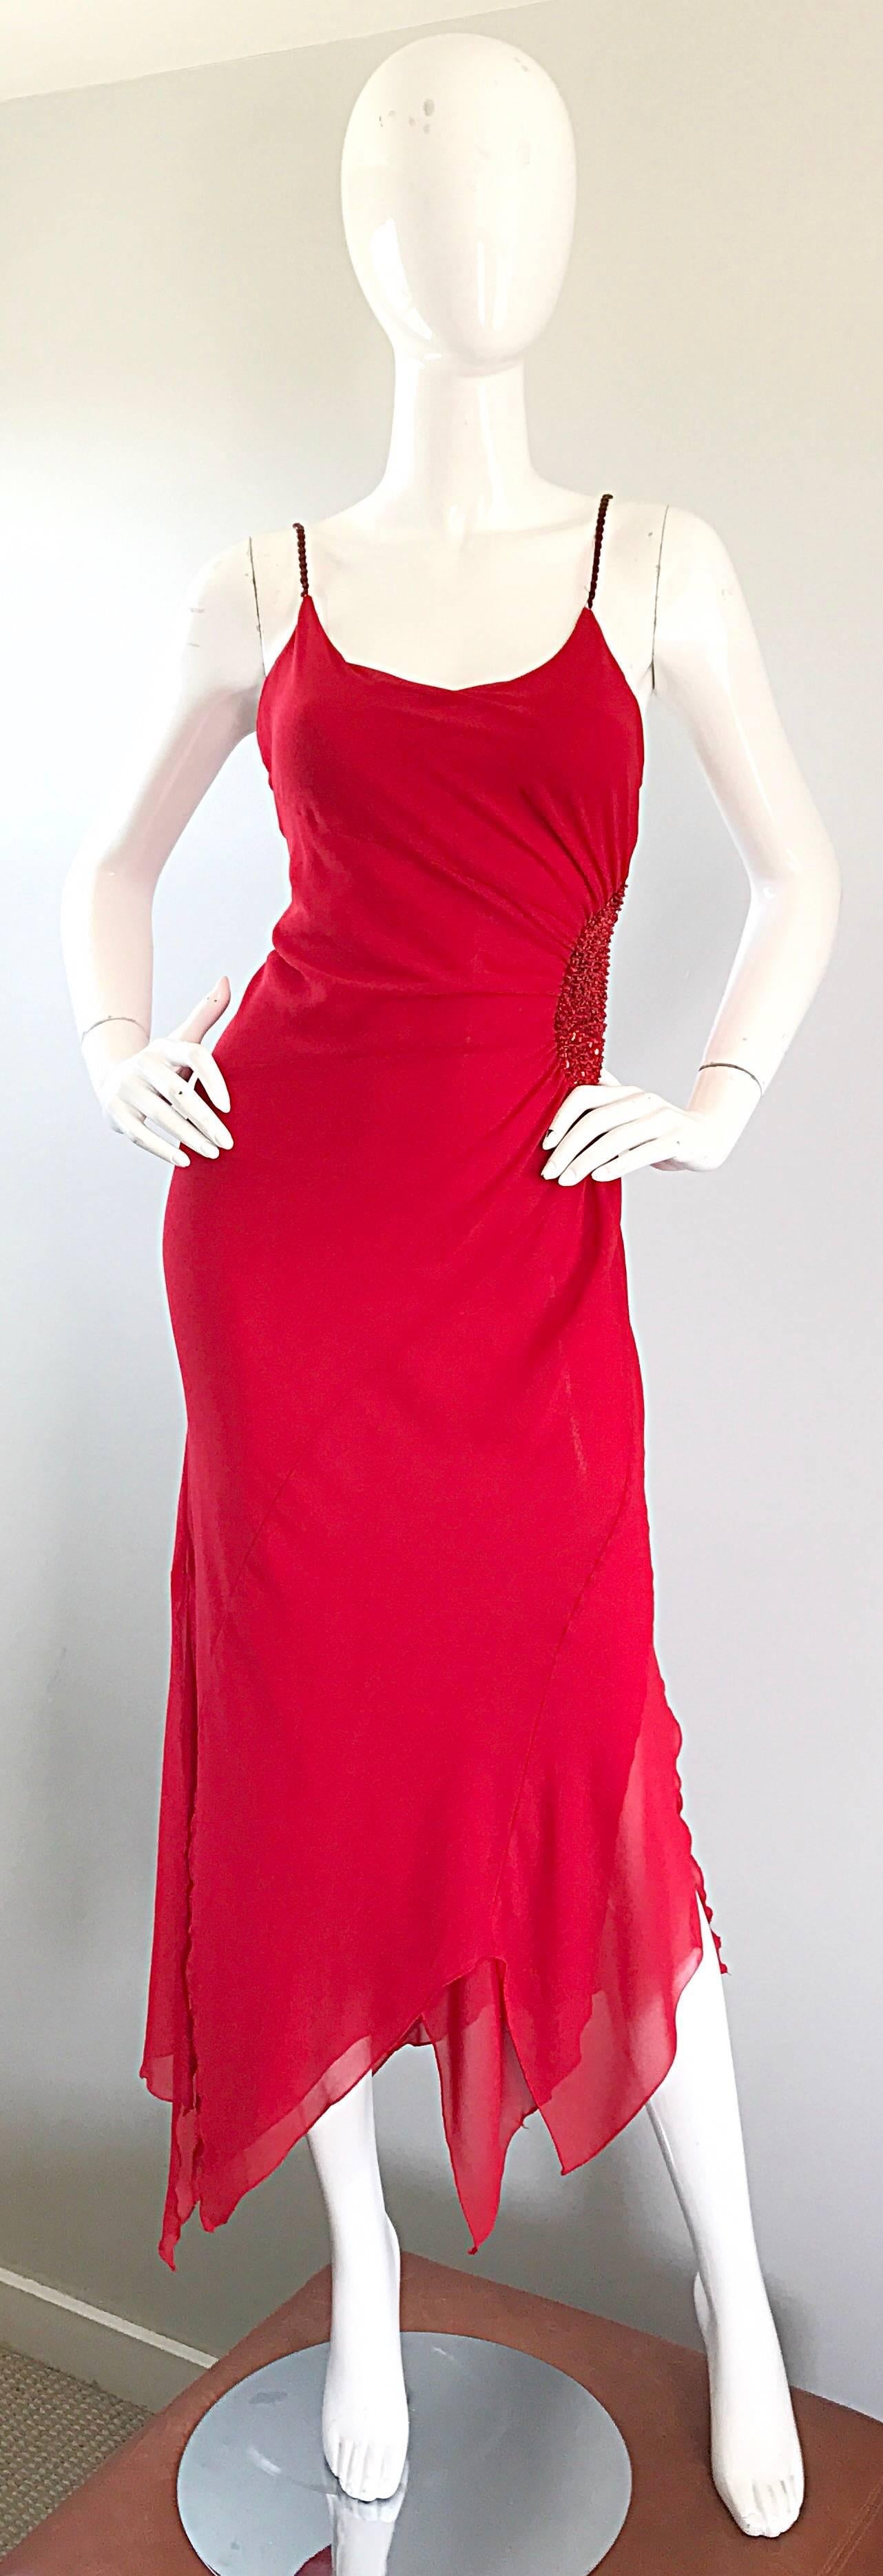 Sexy 70s lipstick red chiffon handkerchief asymmetrical hem sequin and beaded dress! Features red crystal beads on each spaghetti strap. Sequins and beads at left side waist. Flirty asymmetrical hem looks amazing with movement! Great quality, with